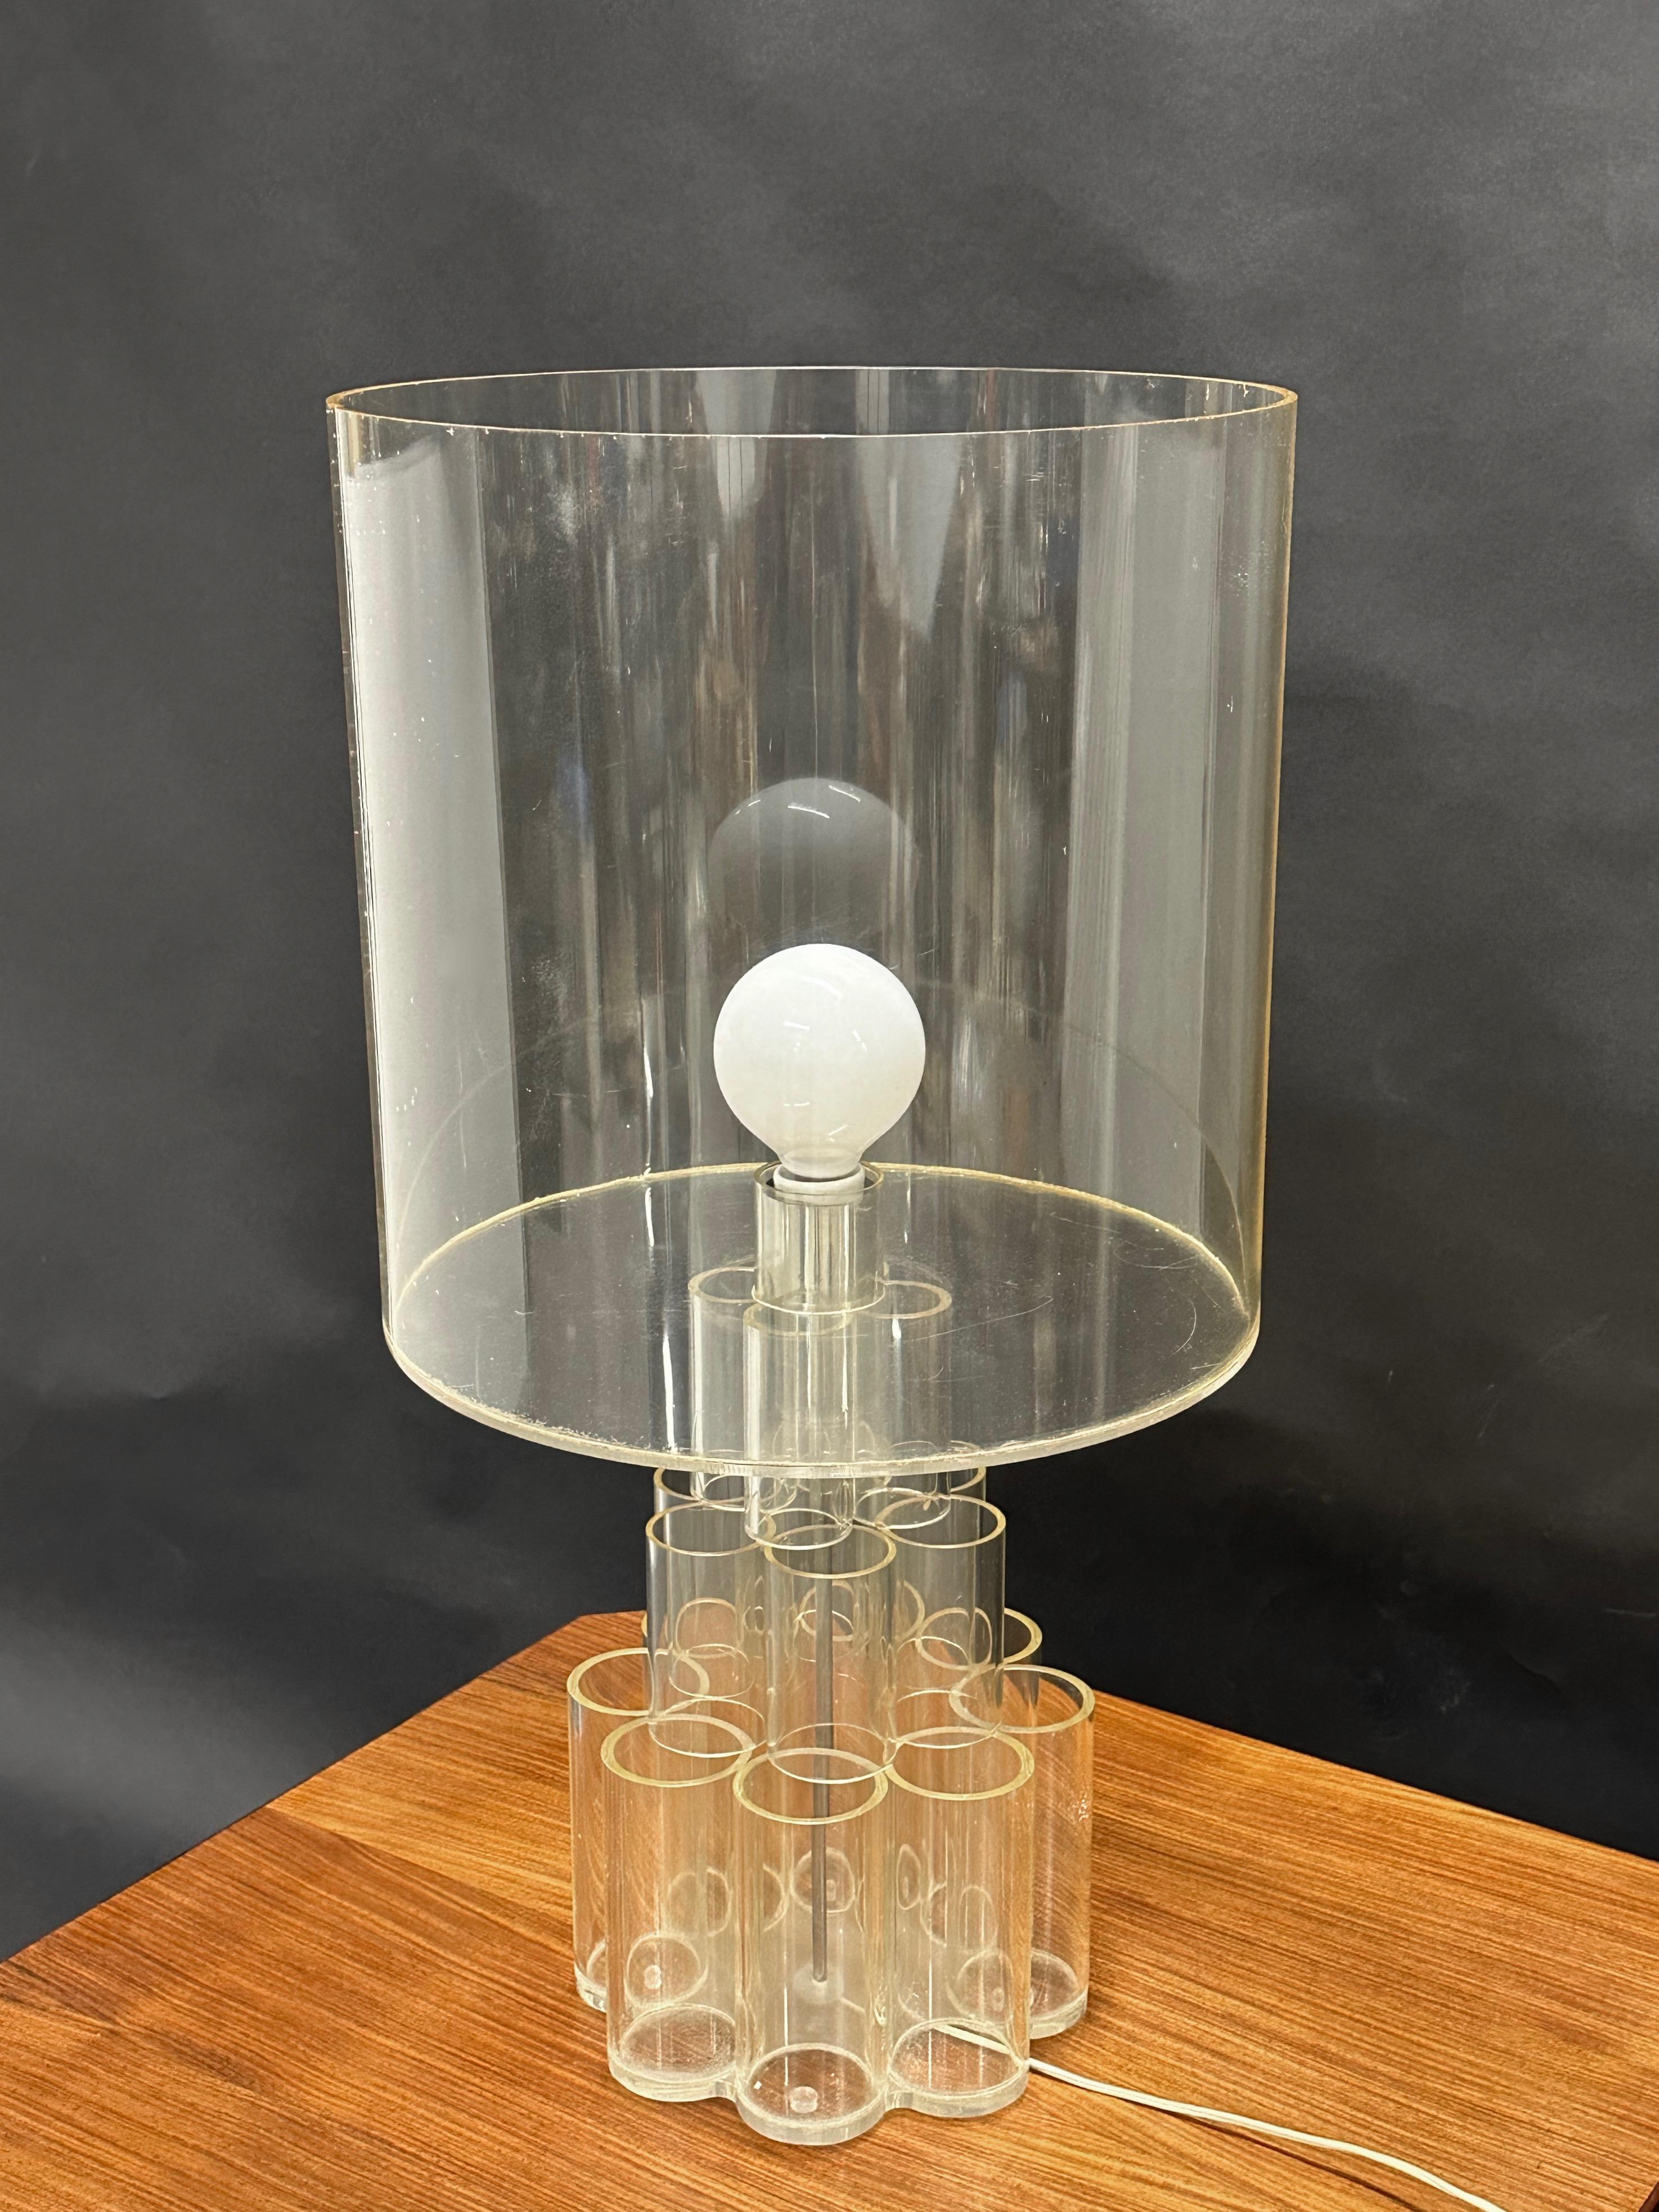 Mid-Century Modern Table Lamp in Lucite Plexiglass, Panton Style, Italy, 1970s For Sale 10